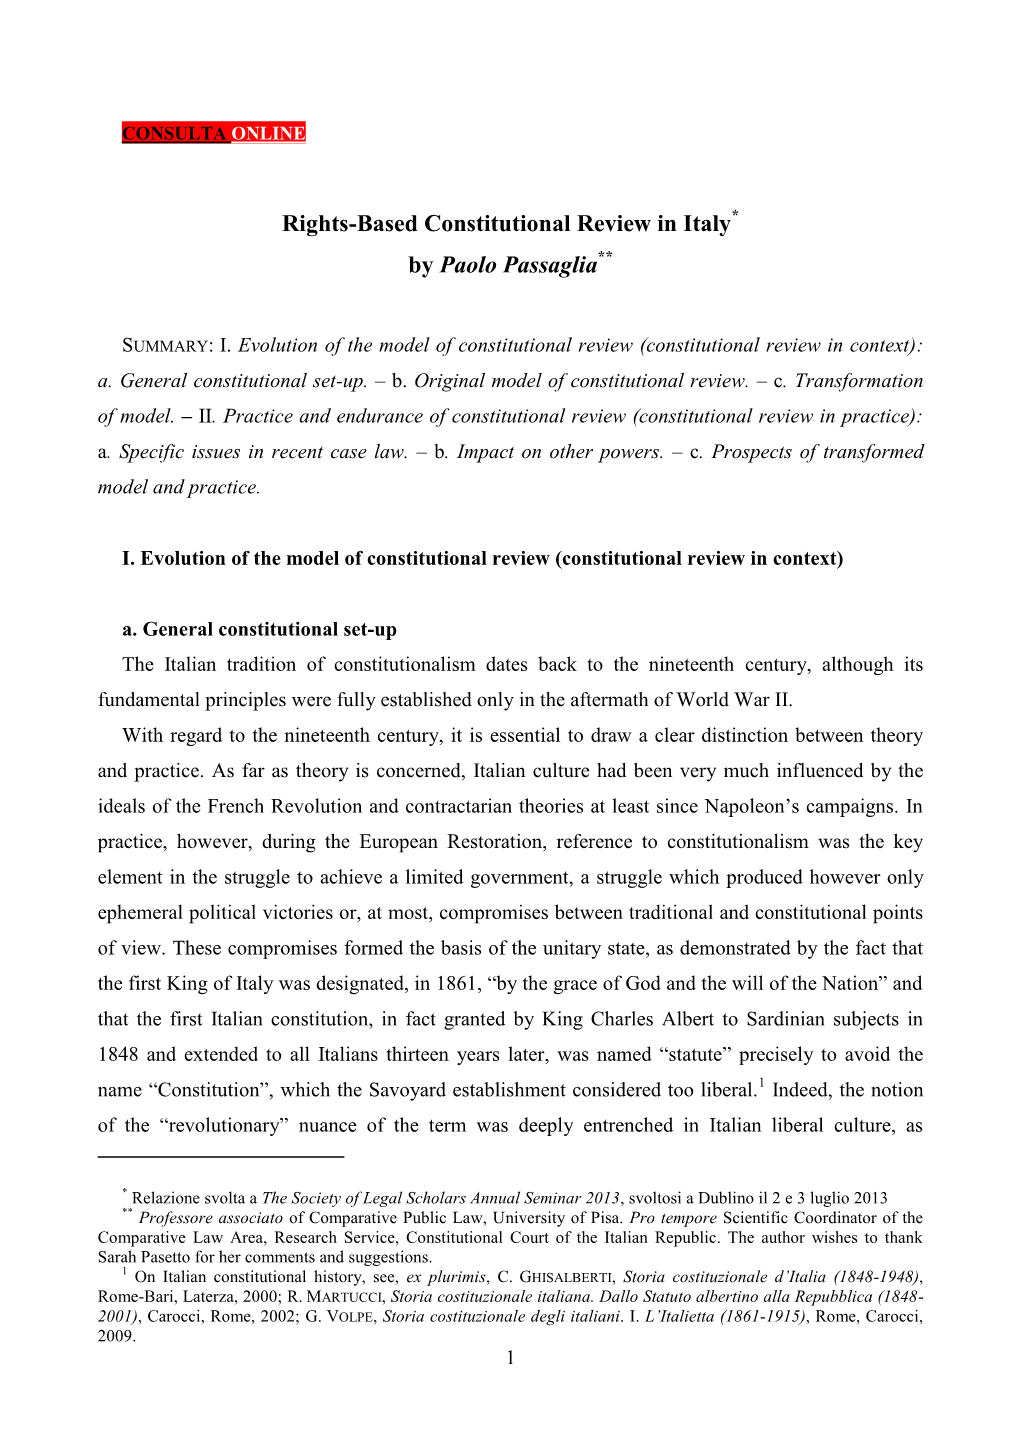 Rights-Based Constitutional Review in Italy by Paolo Passaglia